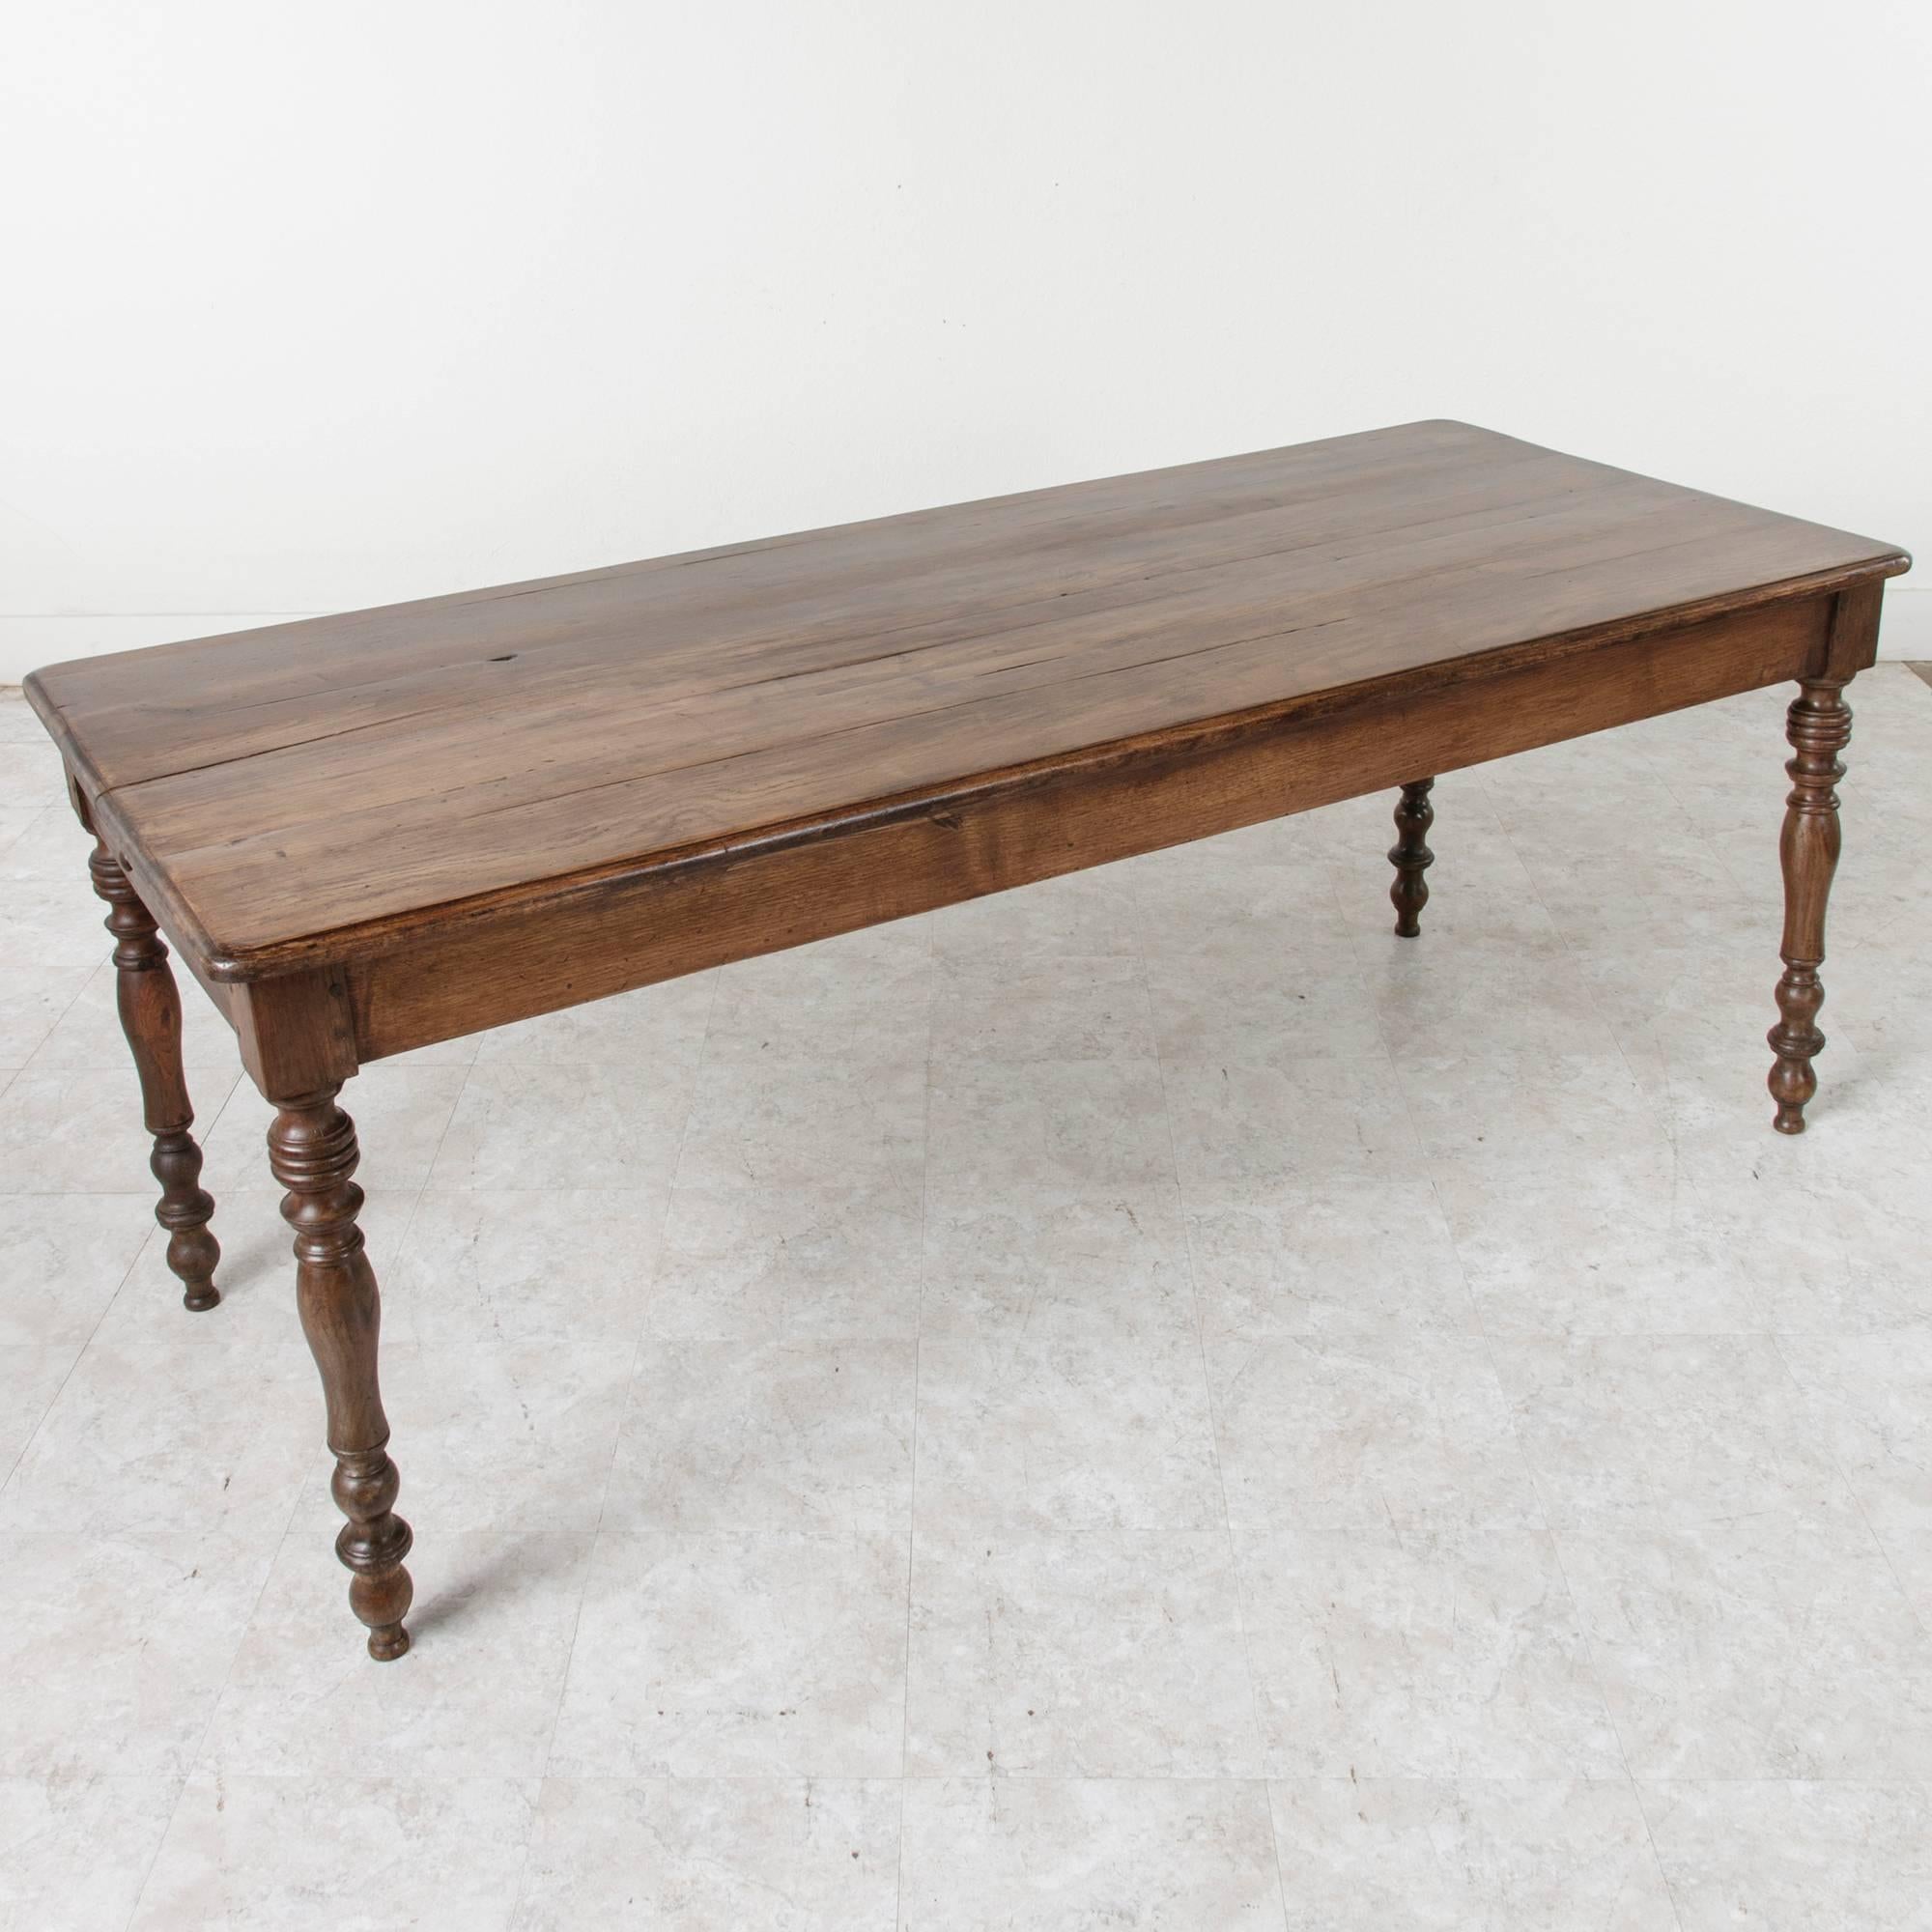 The warm, naturally aged wood of this antique French farm table will bring a sense of history to a dining or kitchen space. Created of hand pegged oak by artisans in Normandy at the beginning of the 20th century, this table features a drawer on each